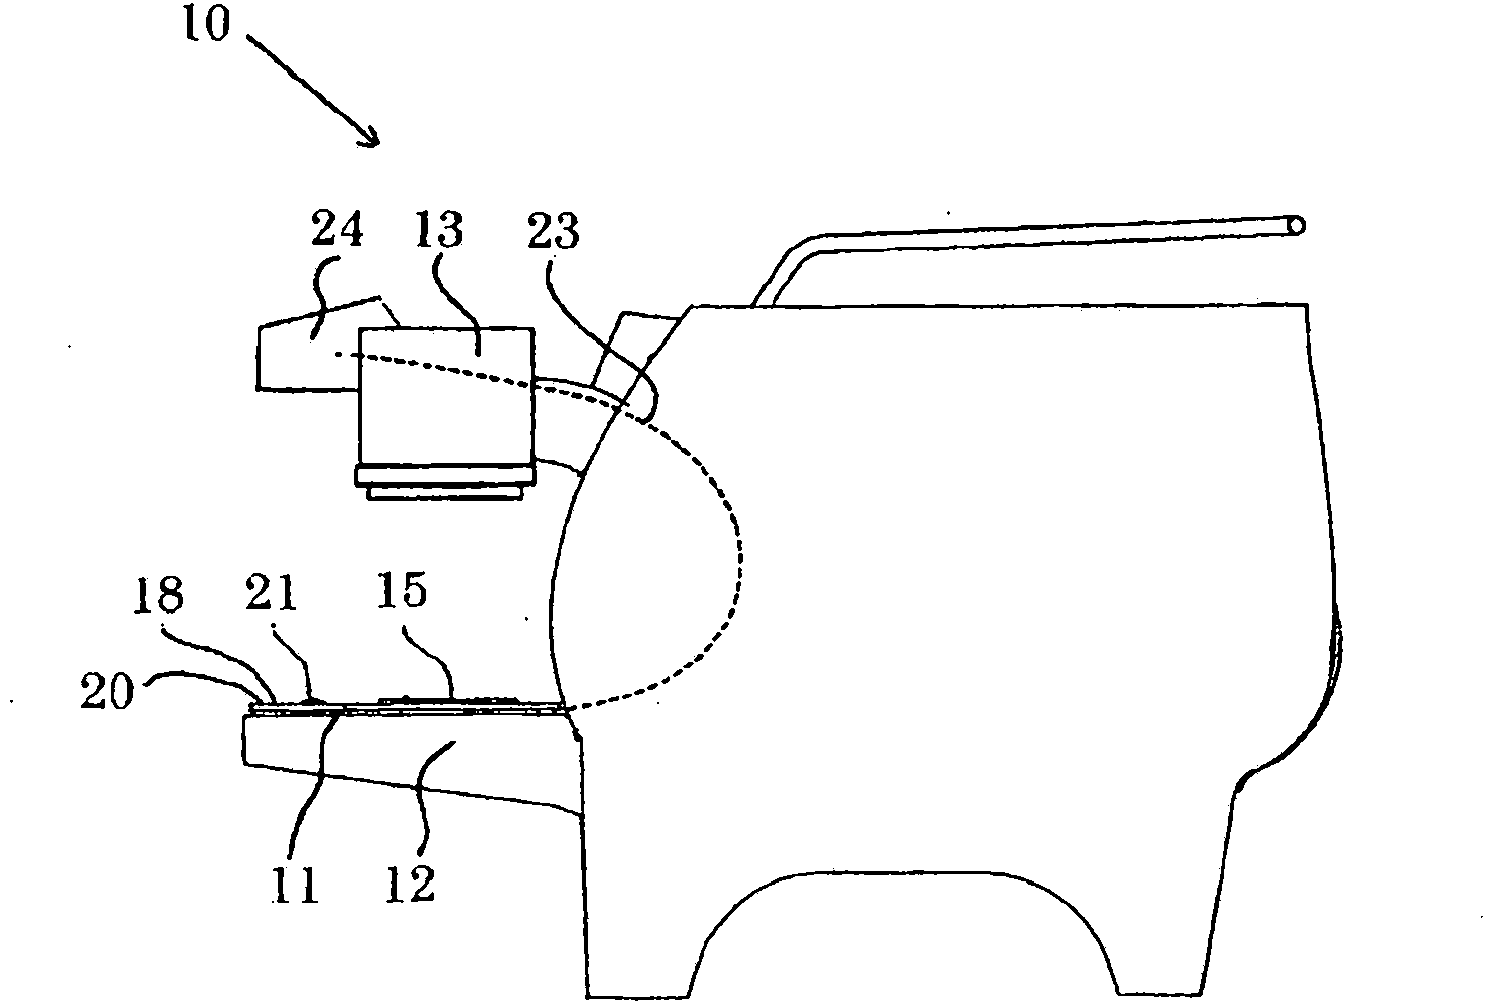 A weighing device for an espresso coffee machine and an espresso coffee machine incorporating such a device